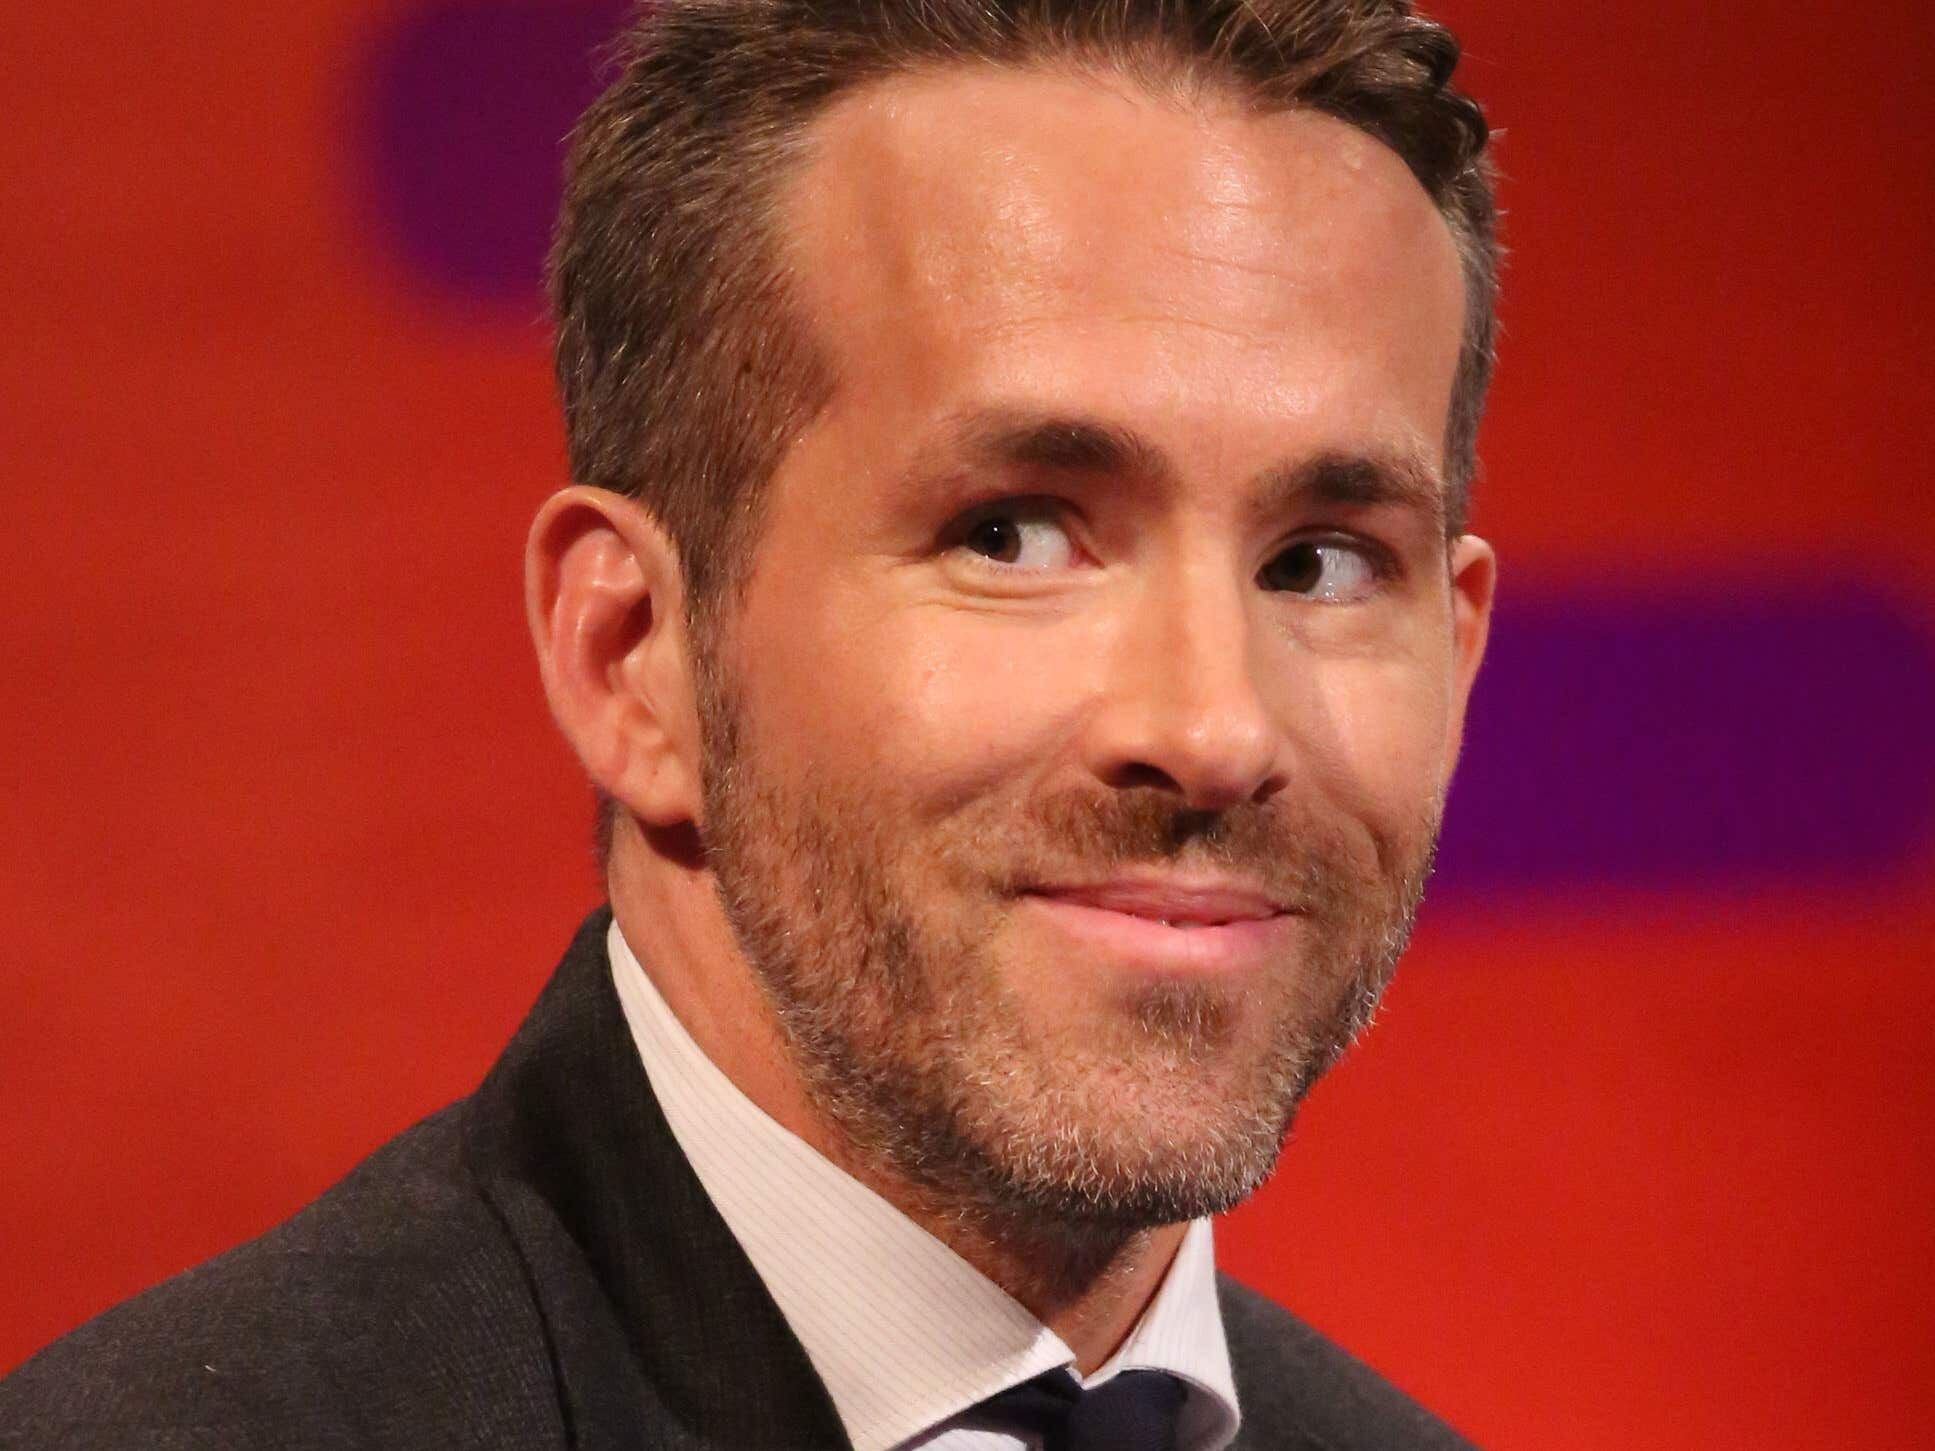 Ryan Reynolds ‘so proud’ of Canadian football team after first World Cup match